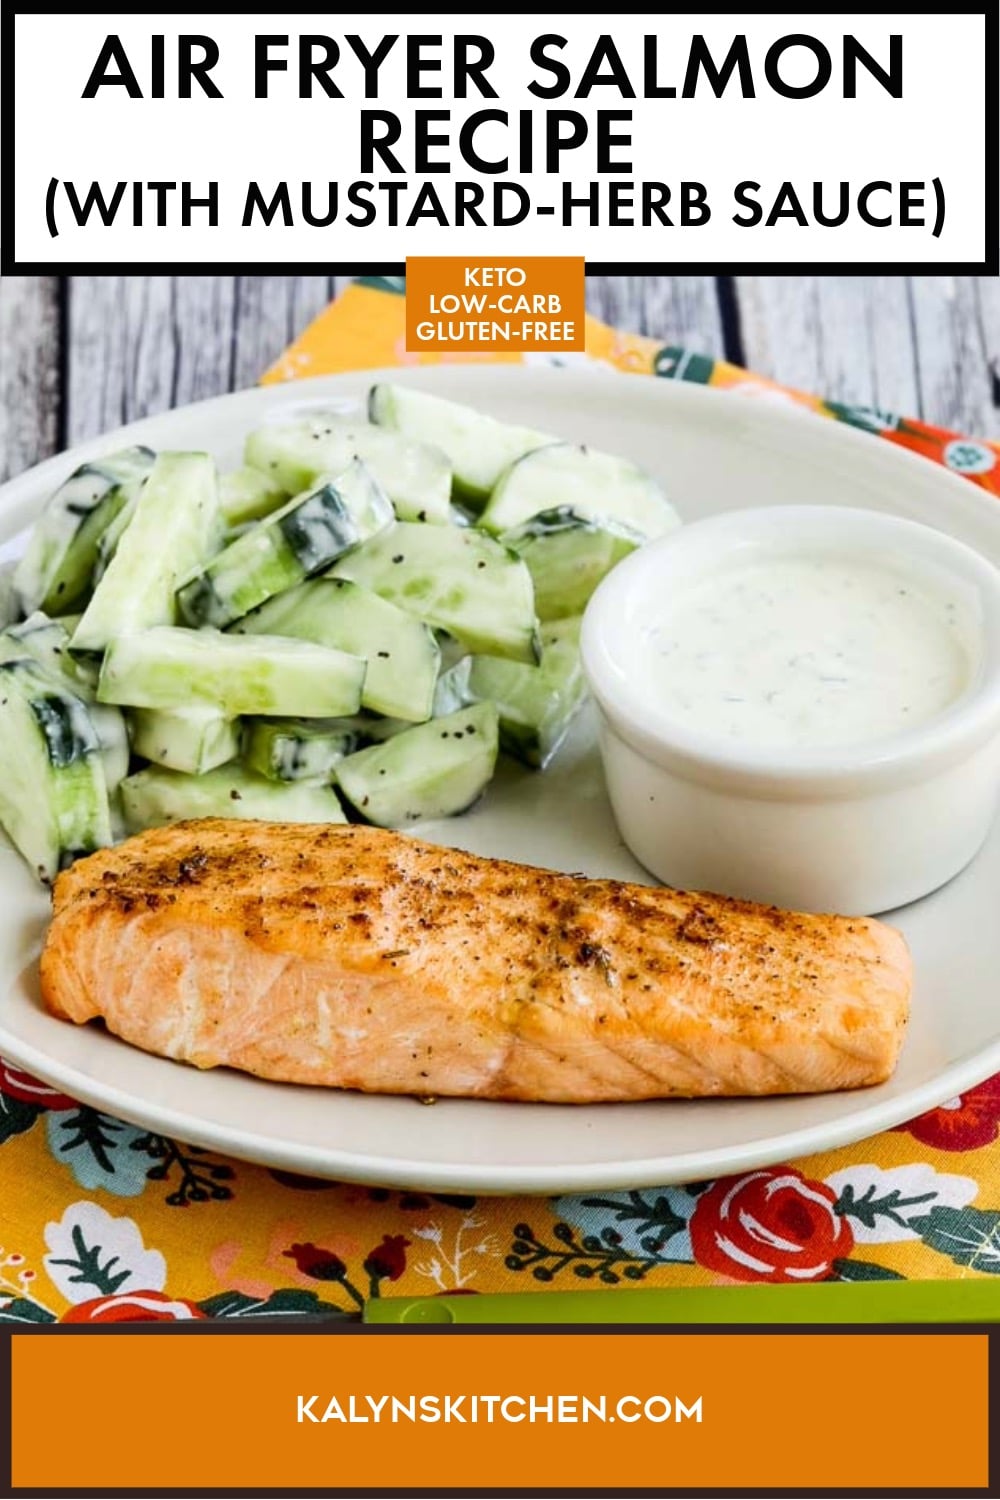 Pinterest image of Air Fryer Salmon Recipe (with Mustard-Herb Sauce)